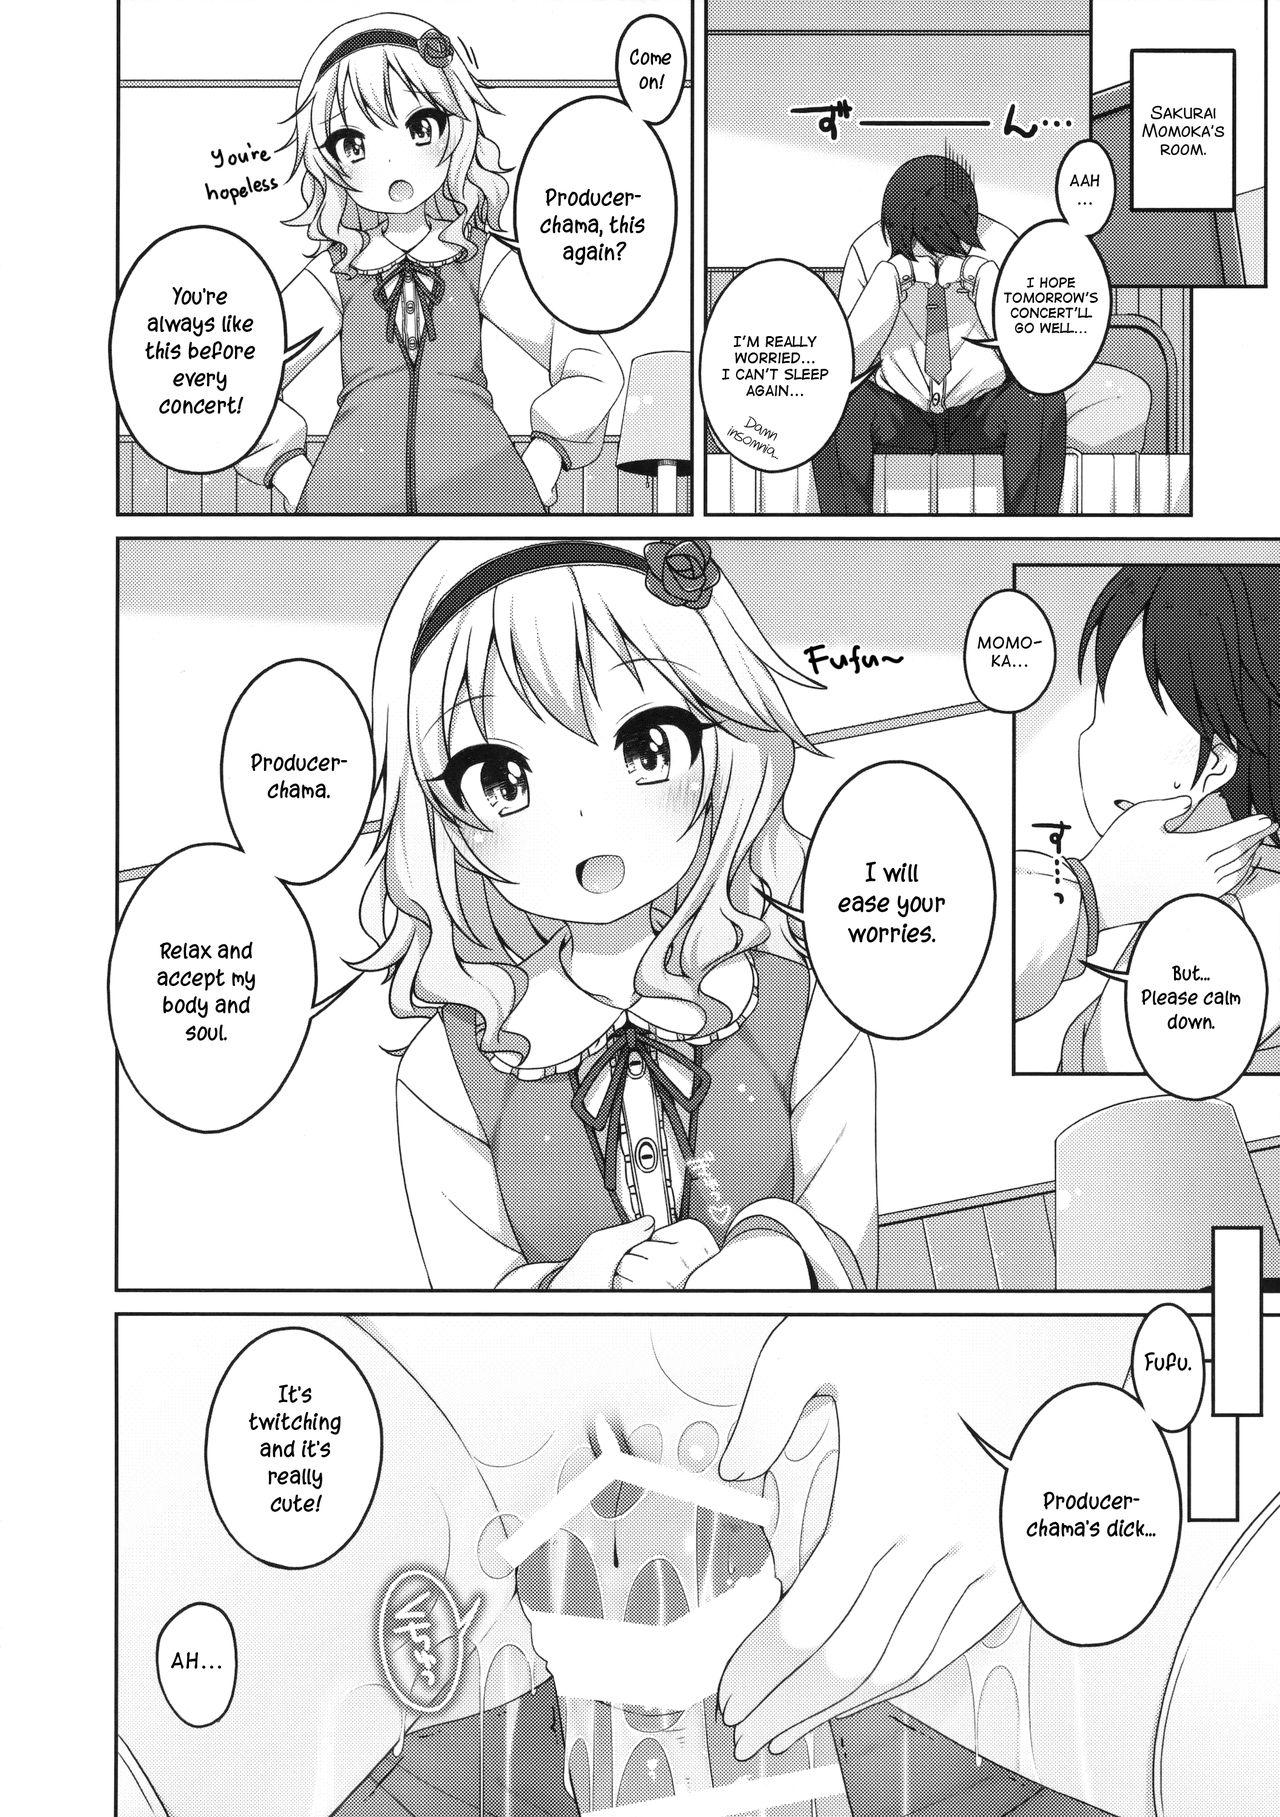 Stepfather Live no Mae no Hi wa | The day before the concert - The idolmaster Hot Mom - Page 7